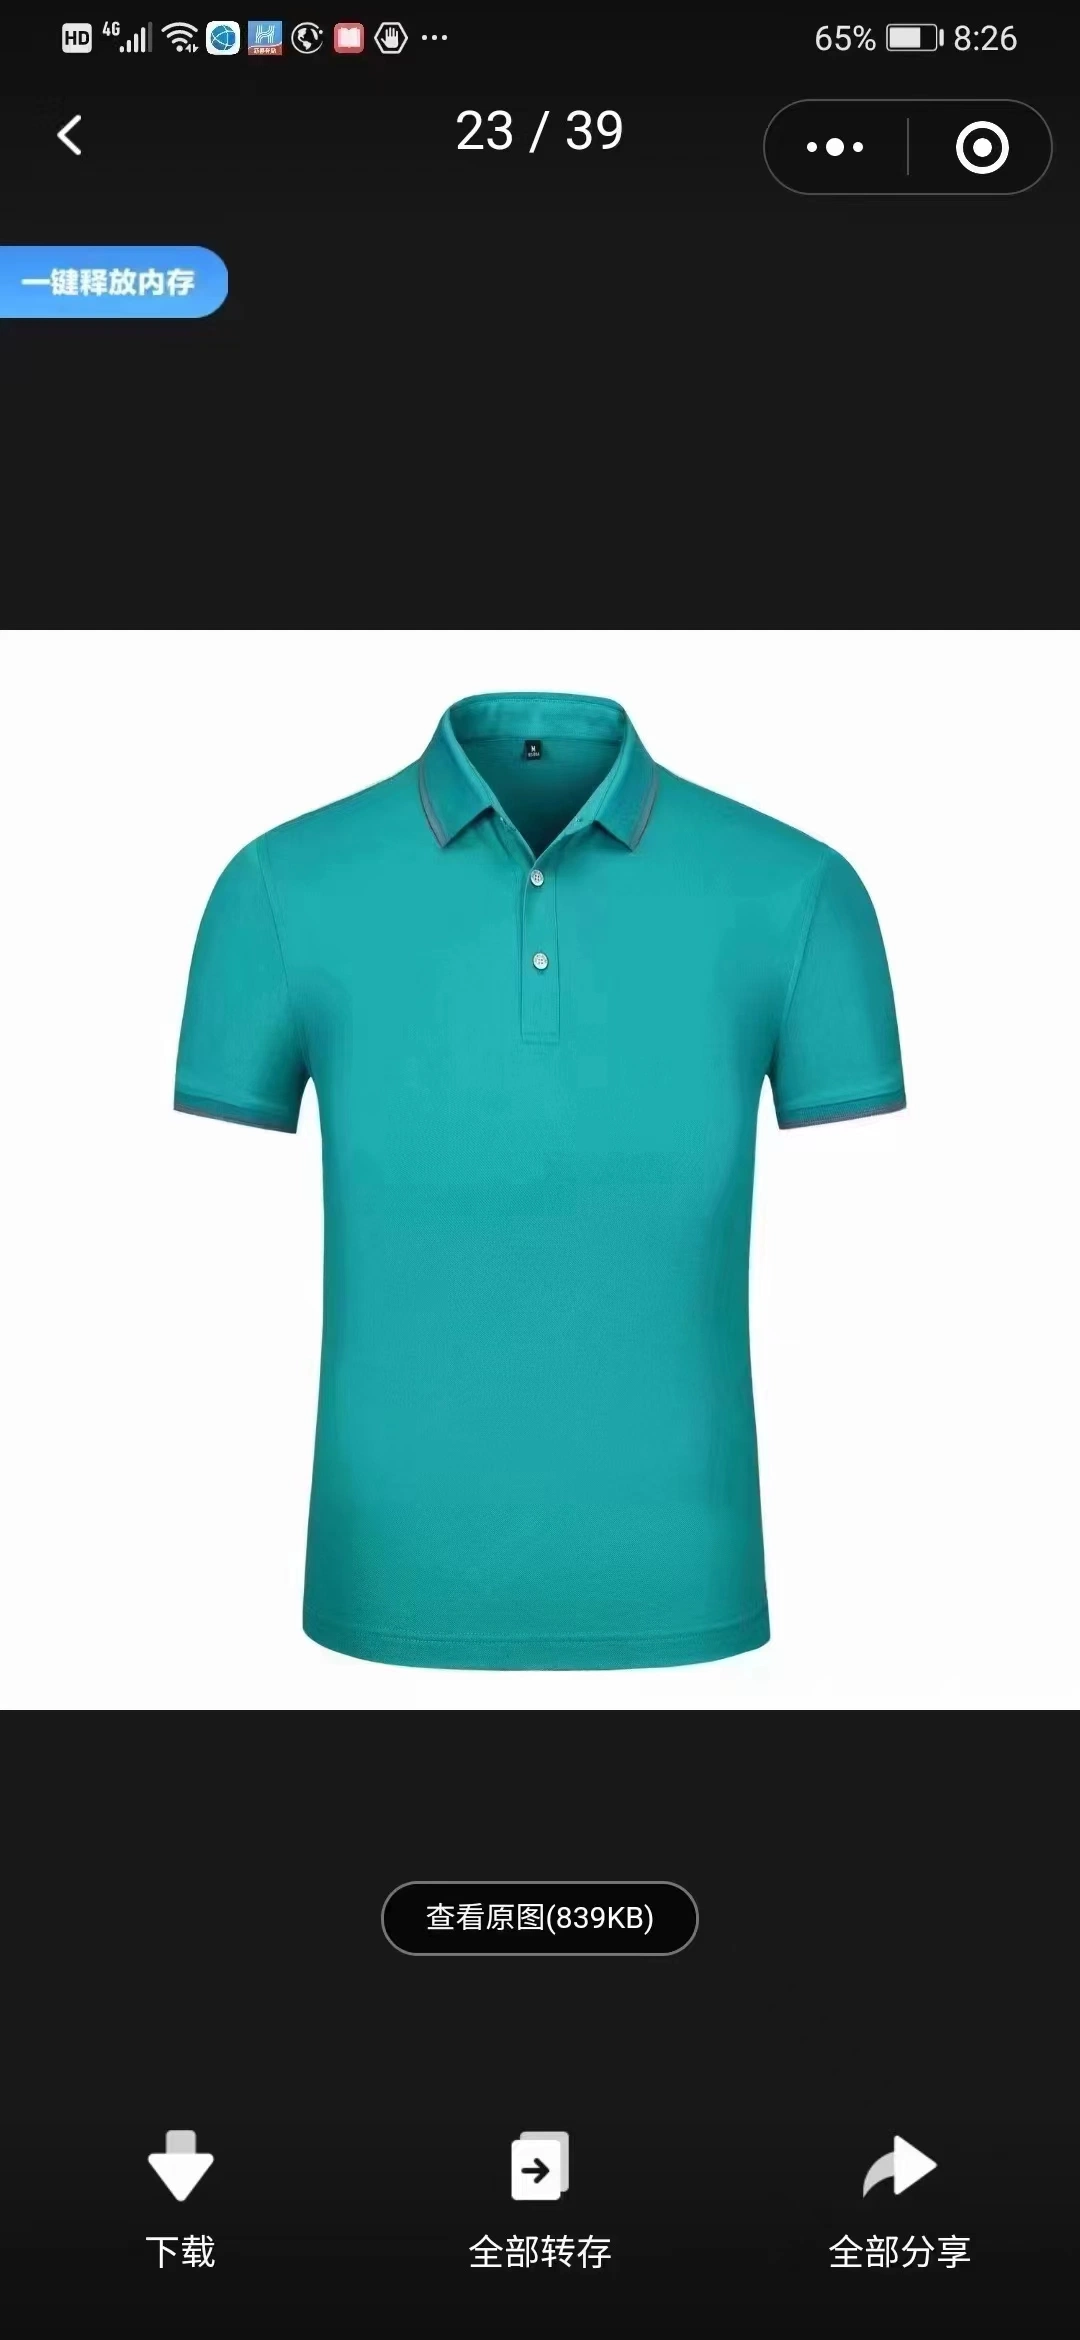 Eight Color for Men's Polo Shirt Very Cheaper Price